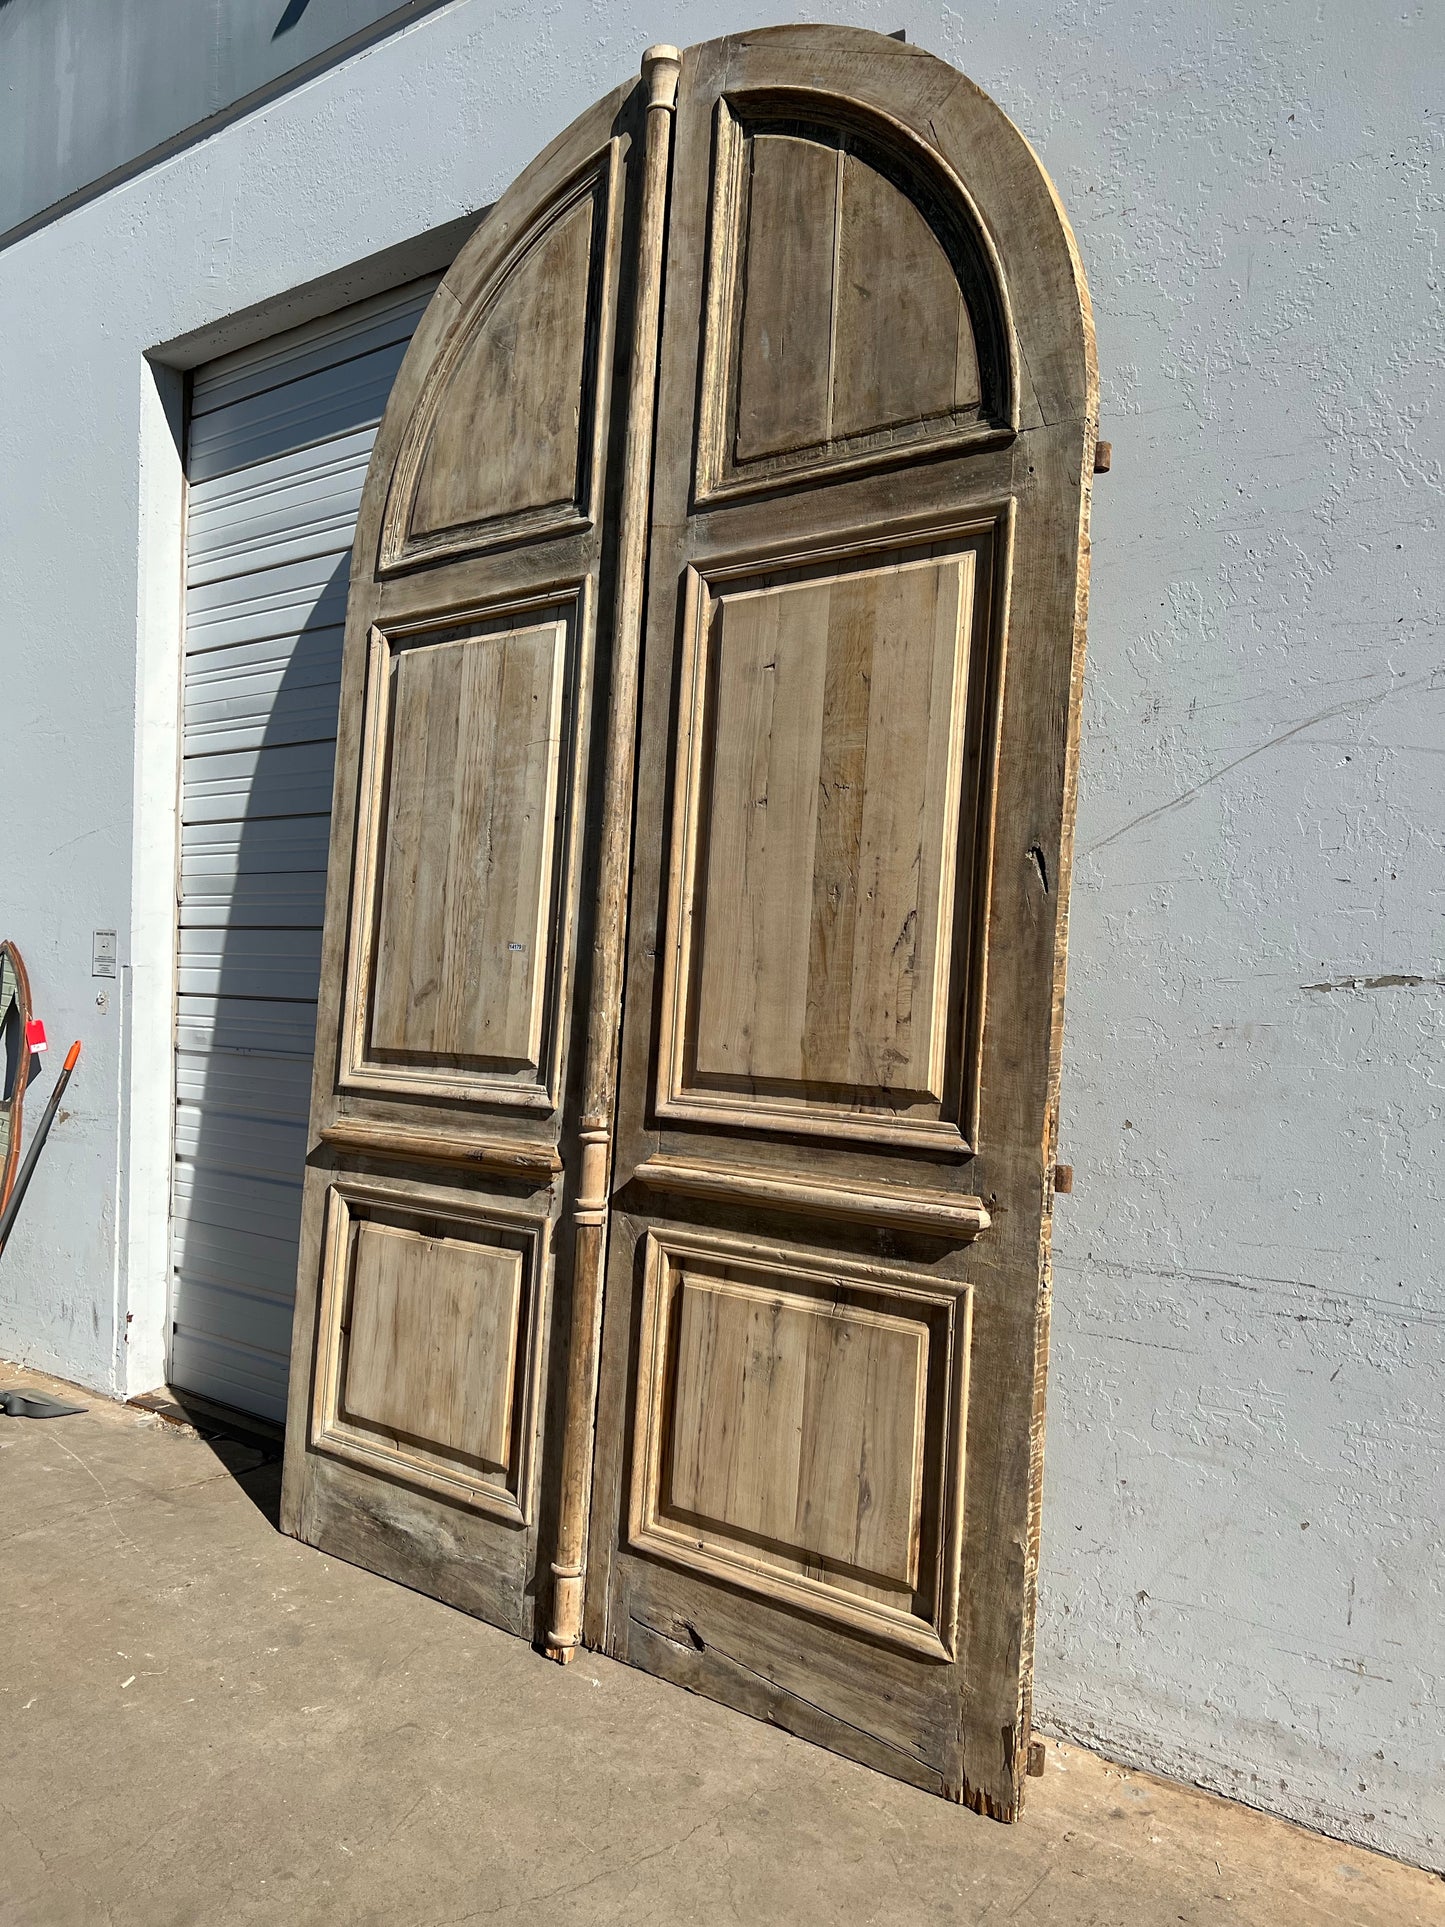 Pair of Washed Antique Wood 3 Panel Arched Doors